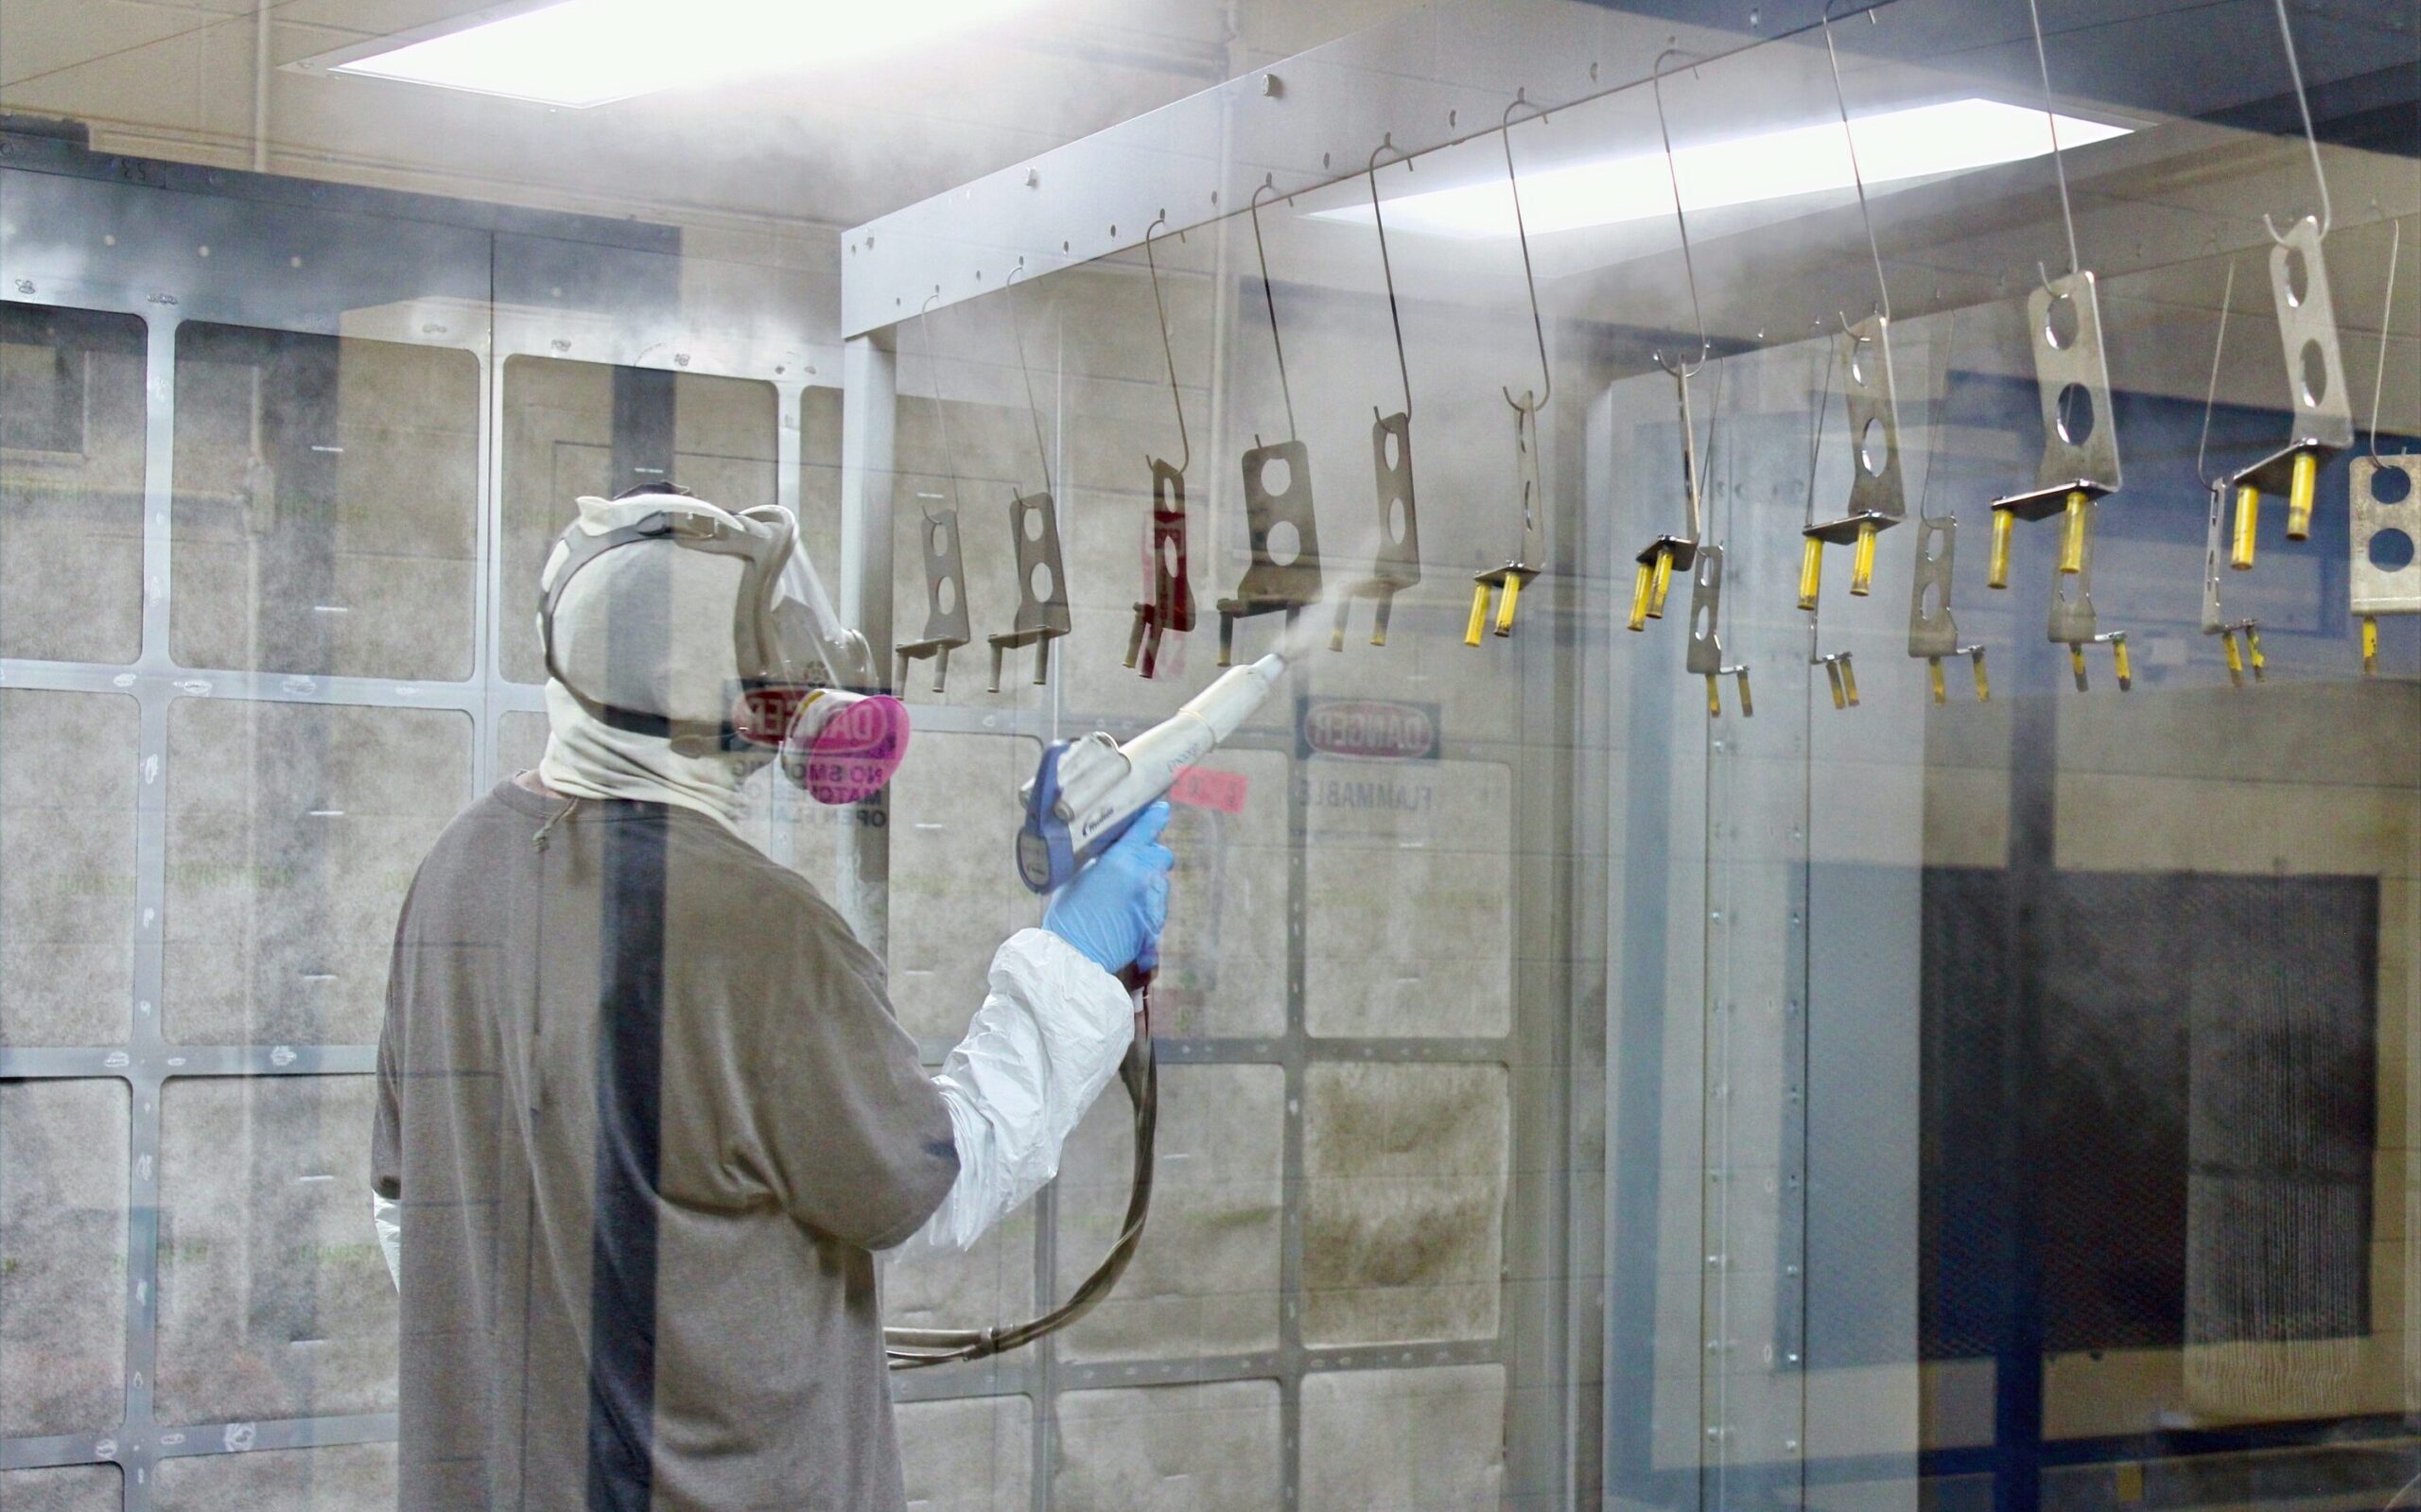 A photo of a person in safety gear using a device to powder coat several parts